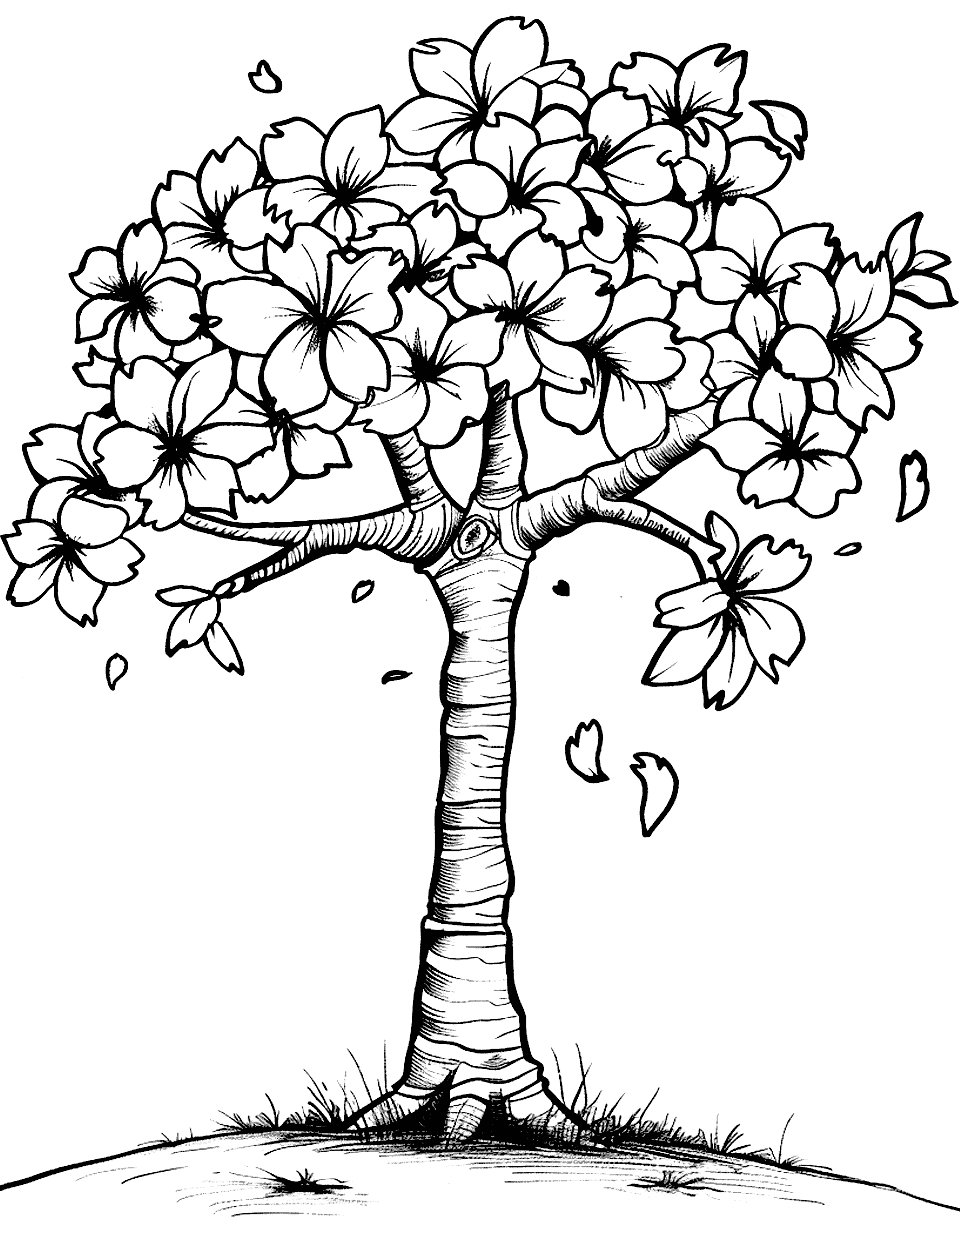 Cherry Blossom Serenity Coloring Page - A gentle cherry blossom tree in full bloom, with petals floating in the air.